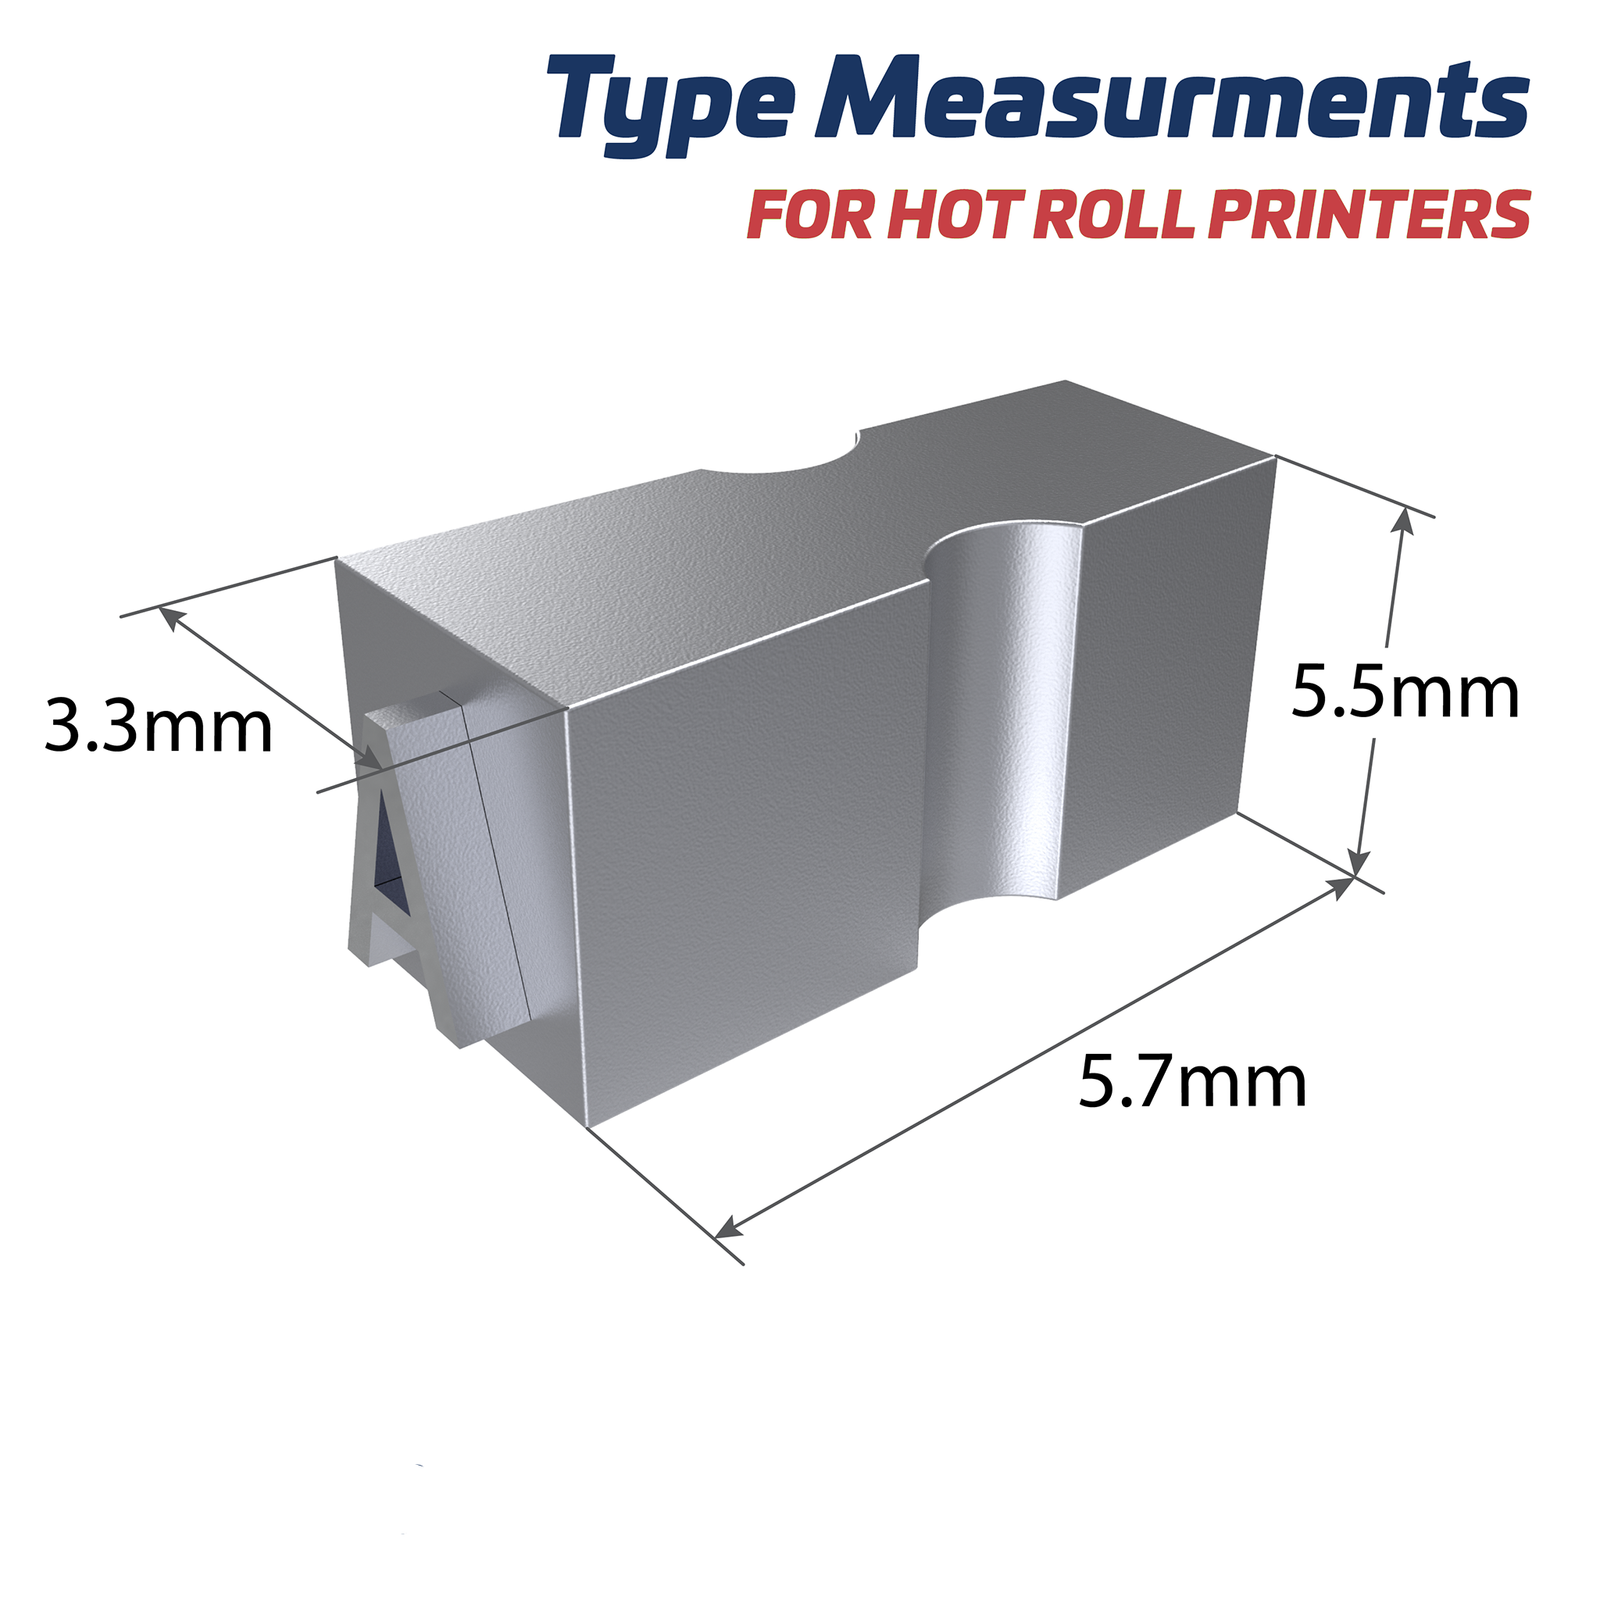 Types for hot roll printers: 5.5 mm height, 5.7 mm length, 3.3 mm width